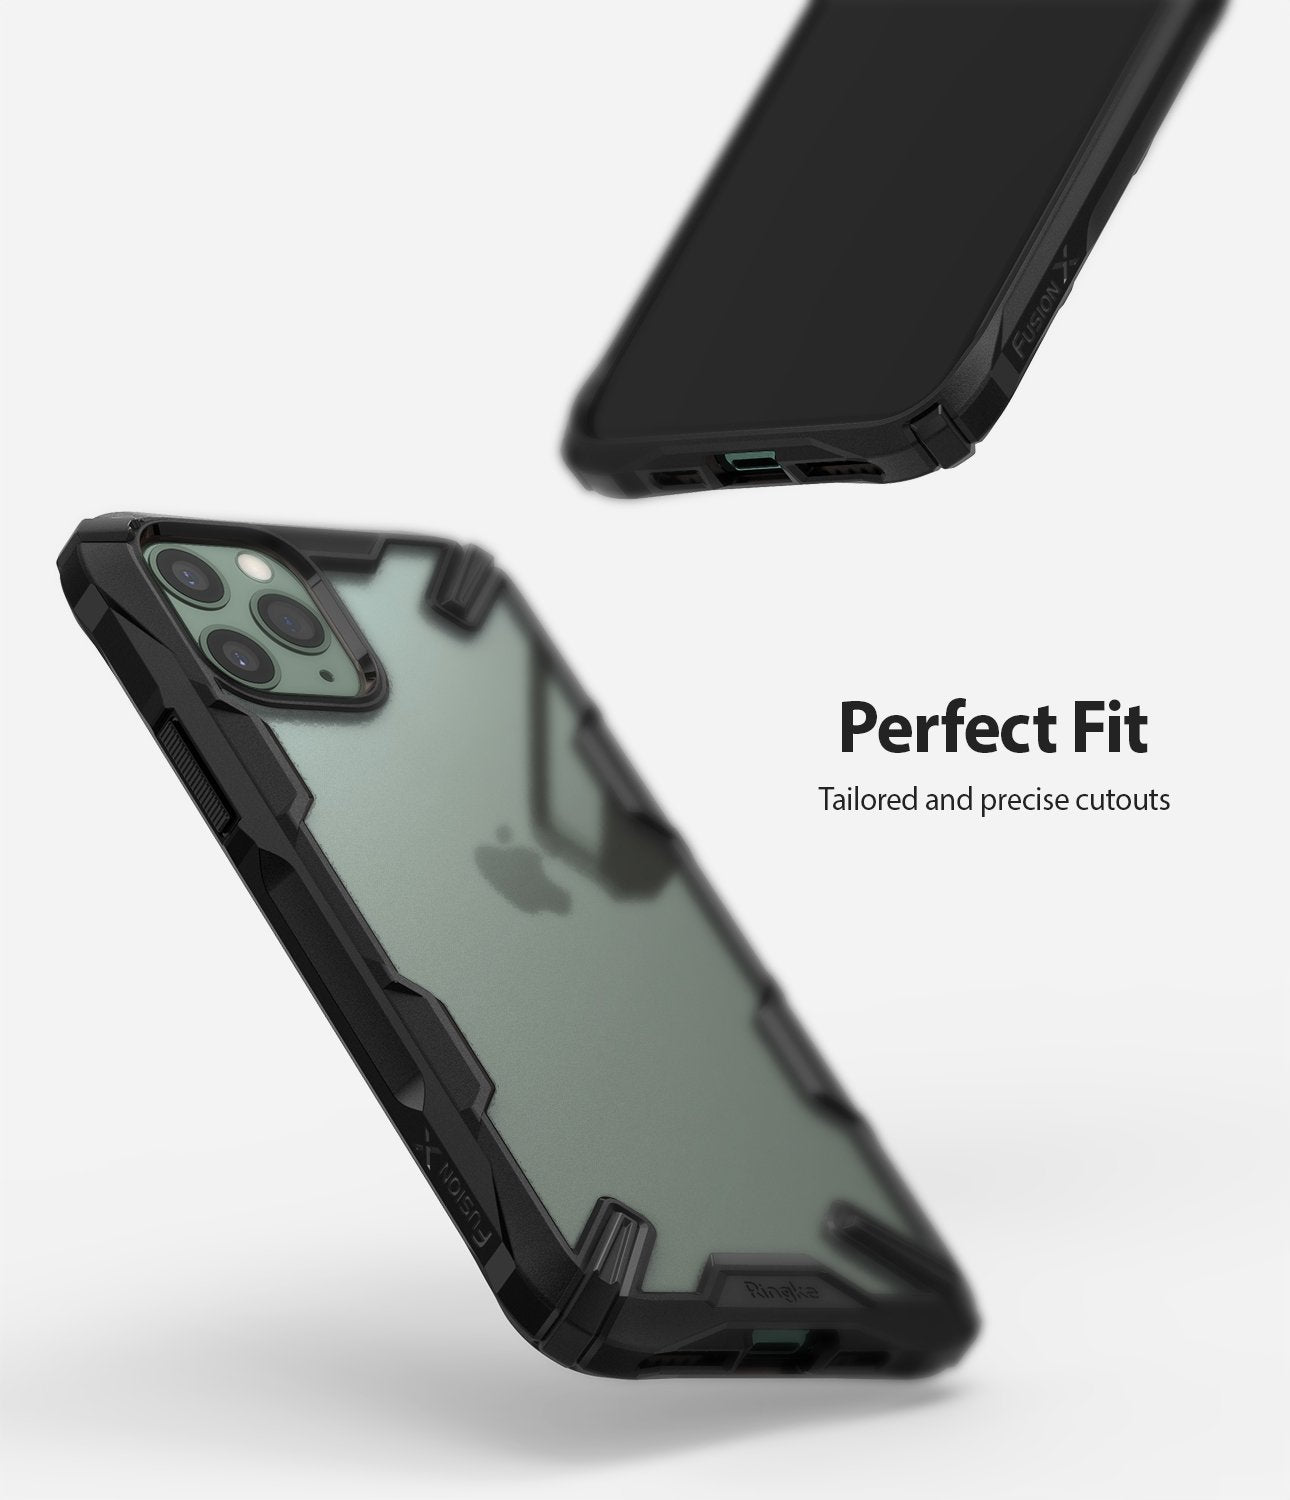 Ringke Fusion-X Matte Designed Case for iPhone 11 Pro Max perfect fit